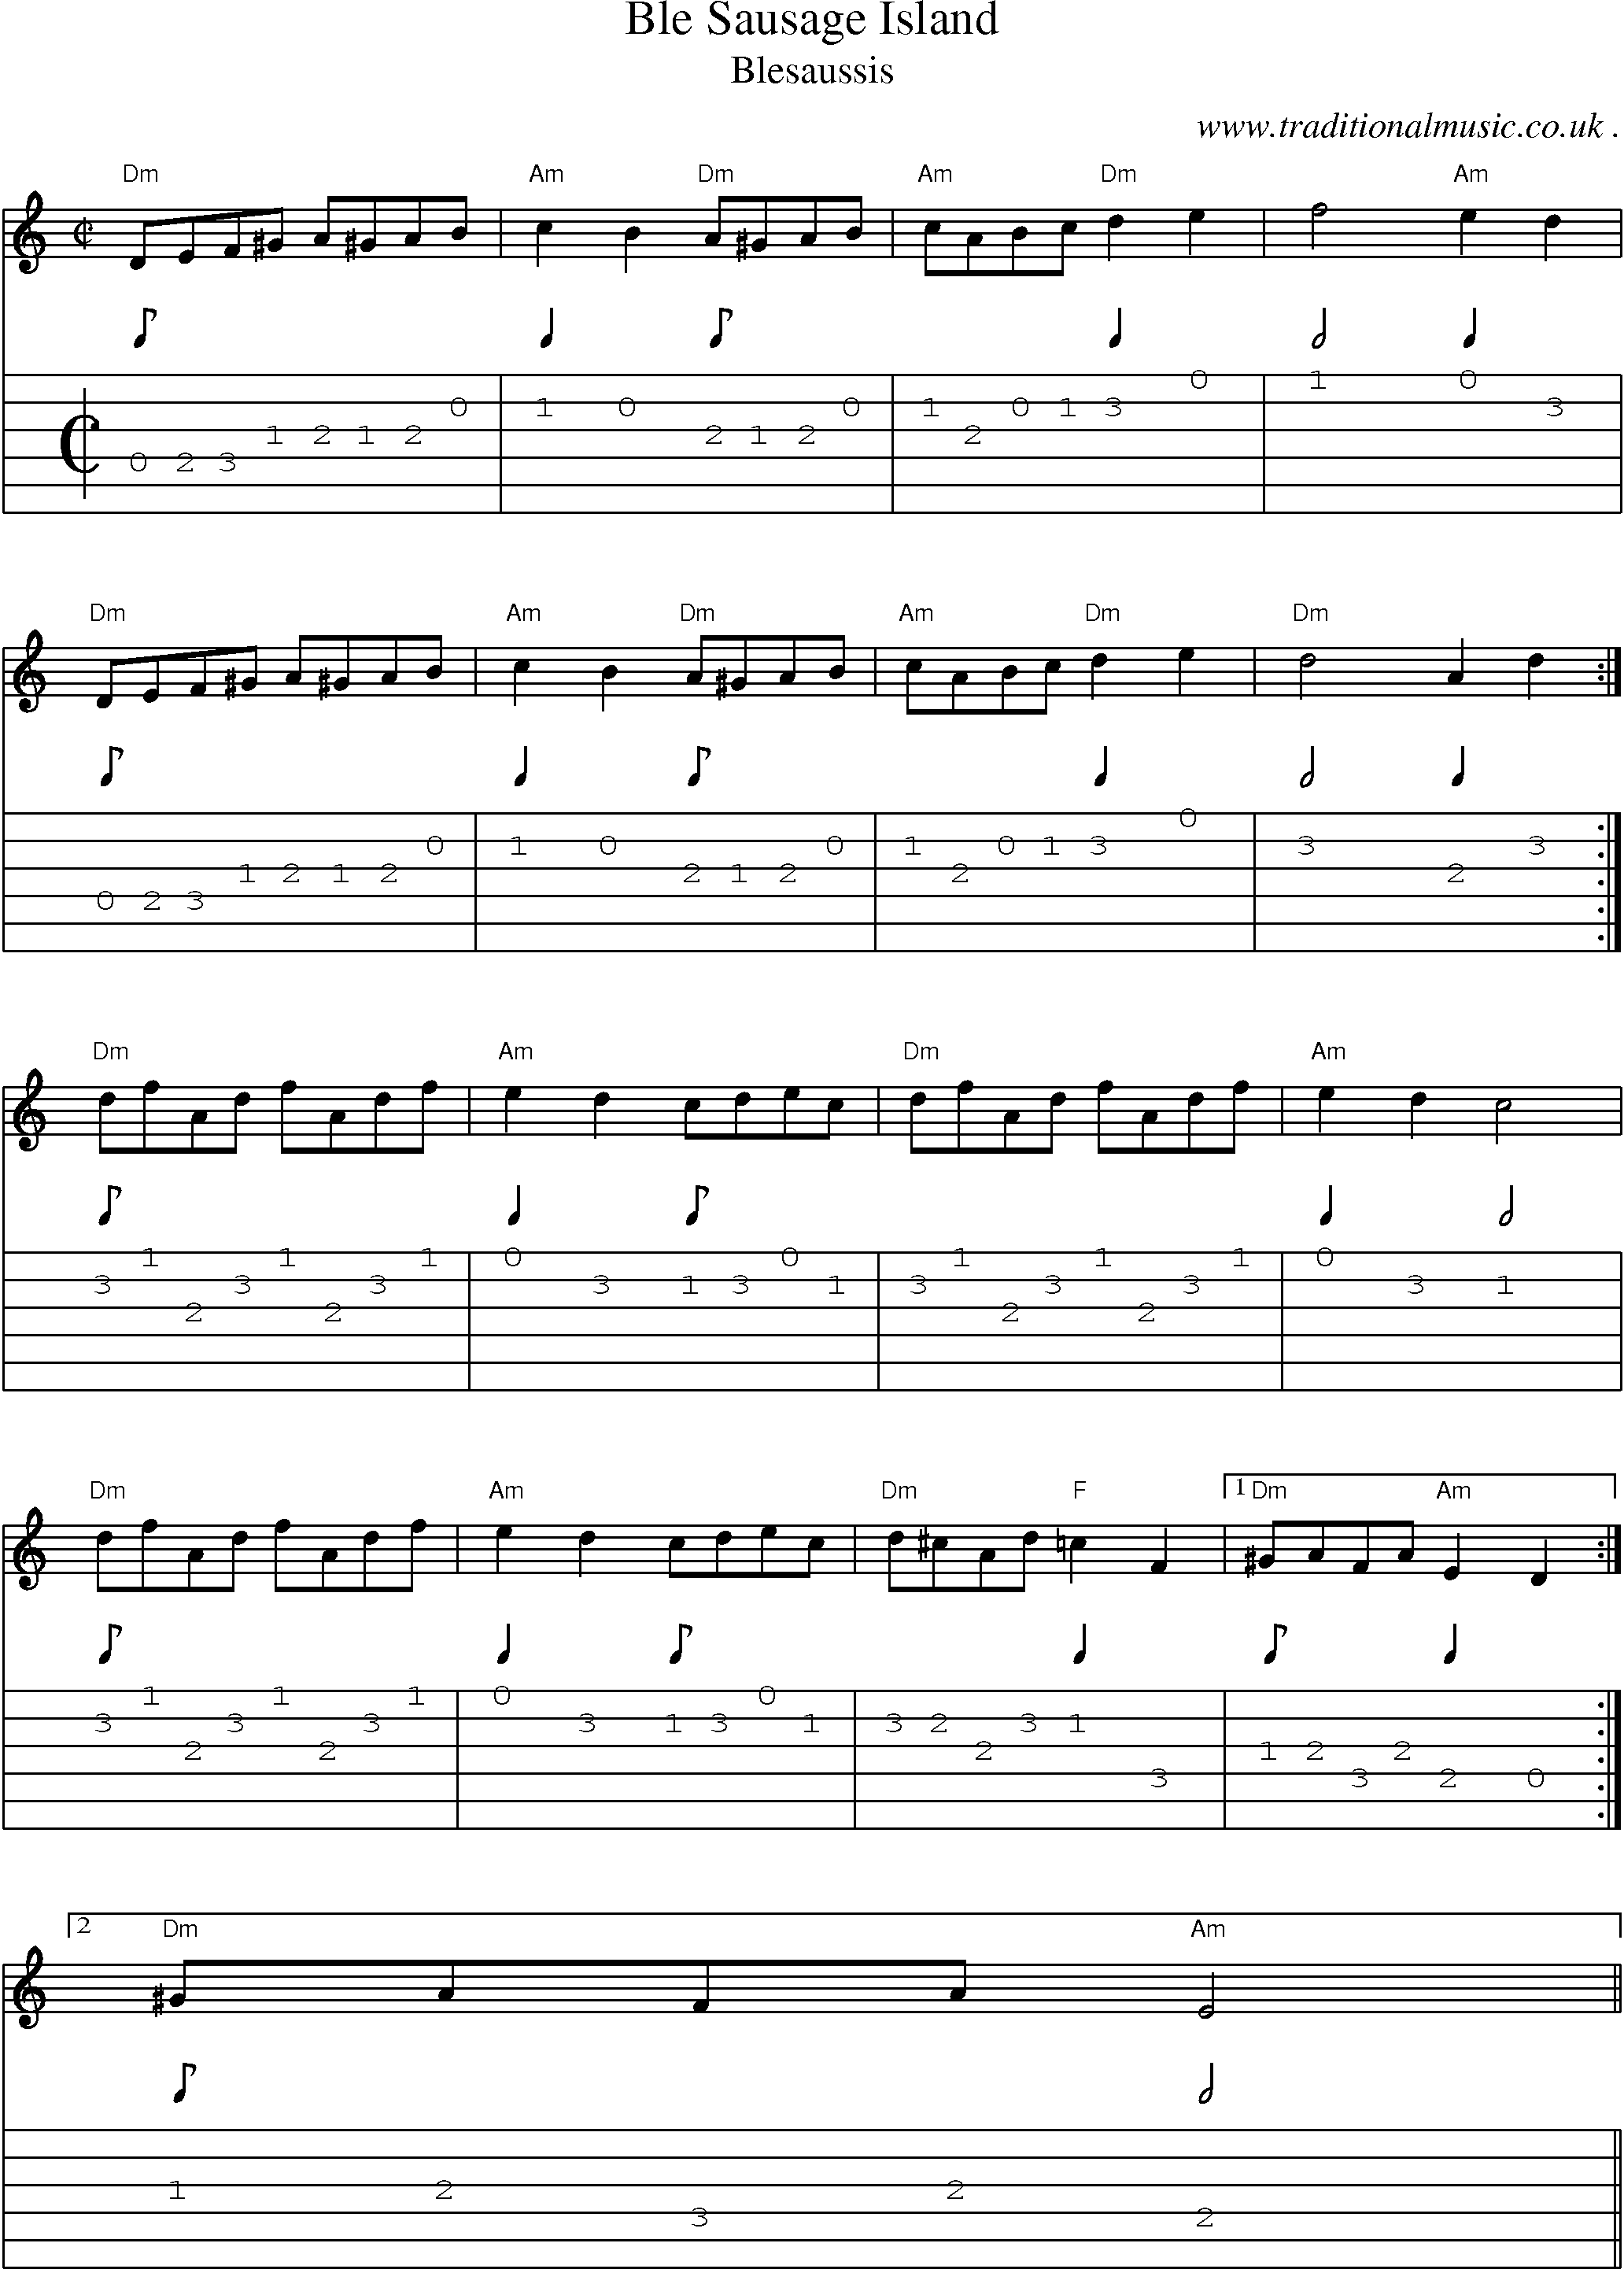 Sheet-Music and Guitar Tabs for Ble Sausage Island